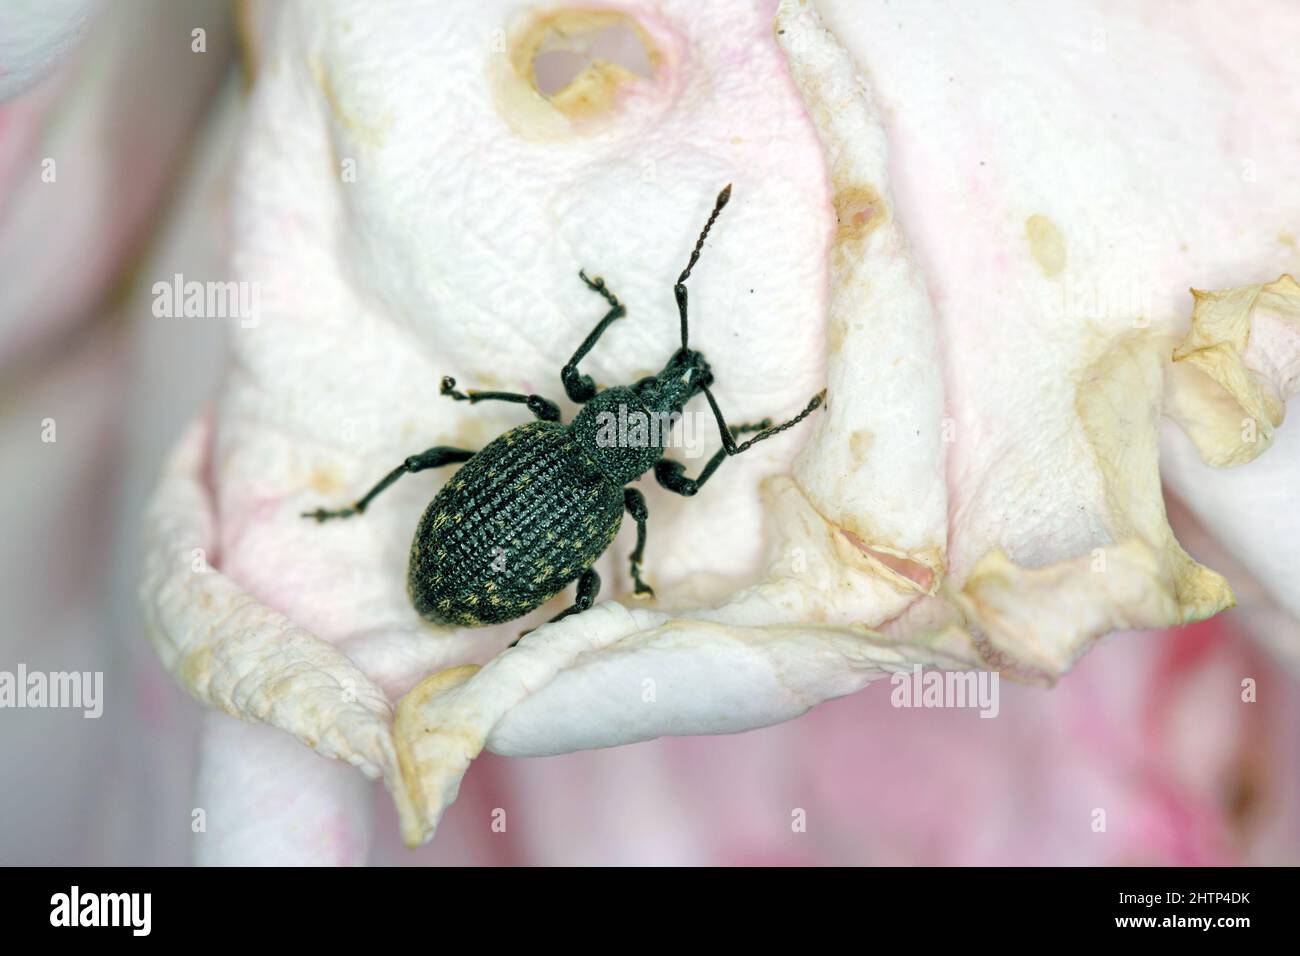 Beetle of Otiorhynchus (sometimes Otiorrhynchus) on a leaf. Many of them e.i. black vine weevil (O. sulcatus) or strawberry root weevil (O. ovatus). Stock Photo